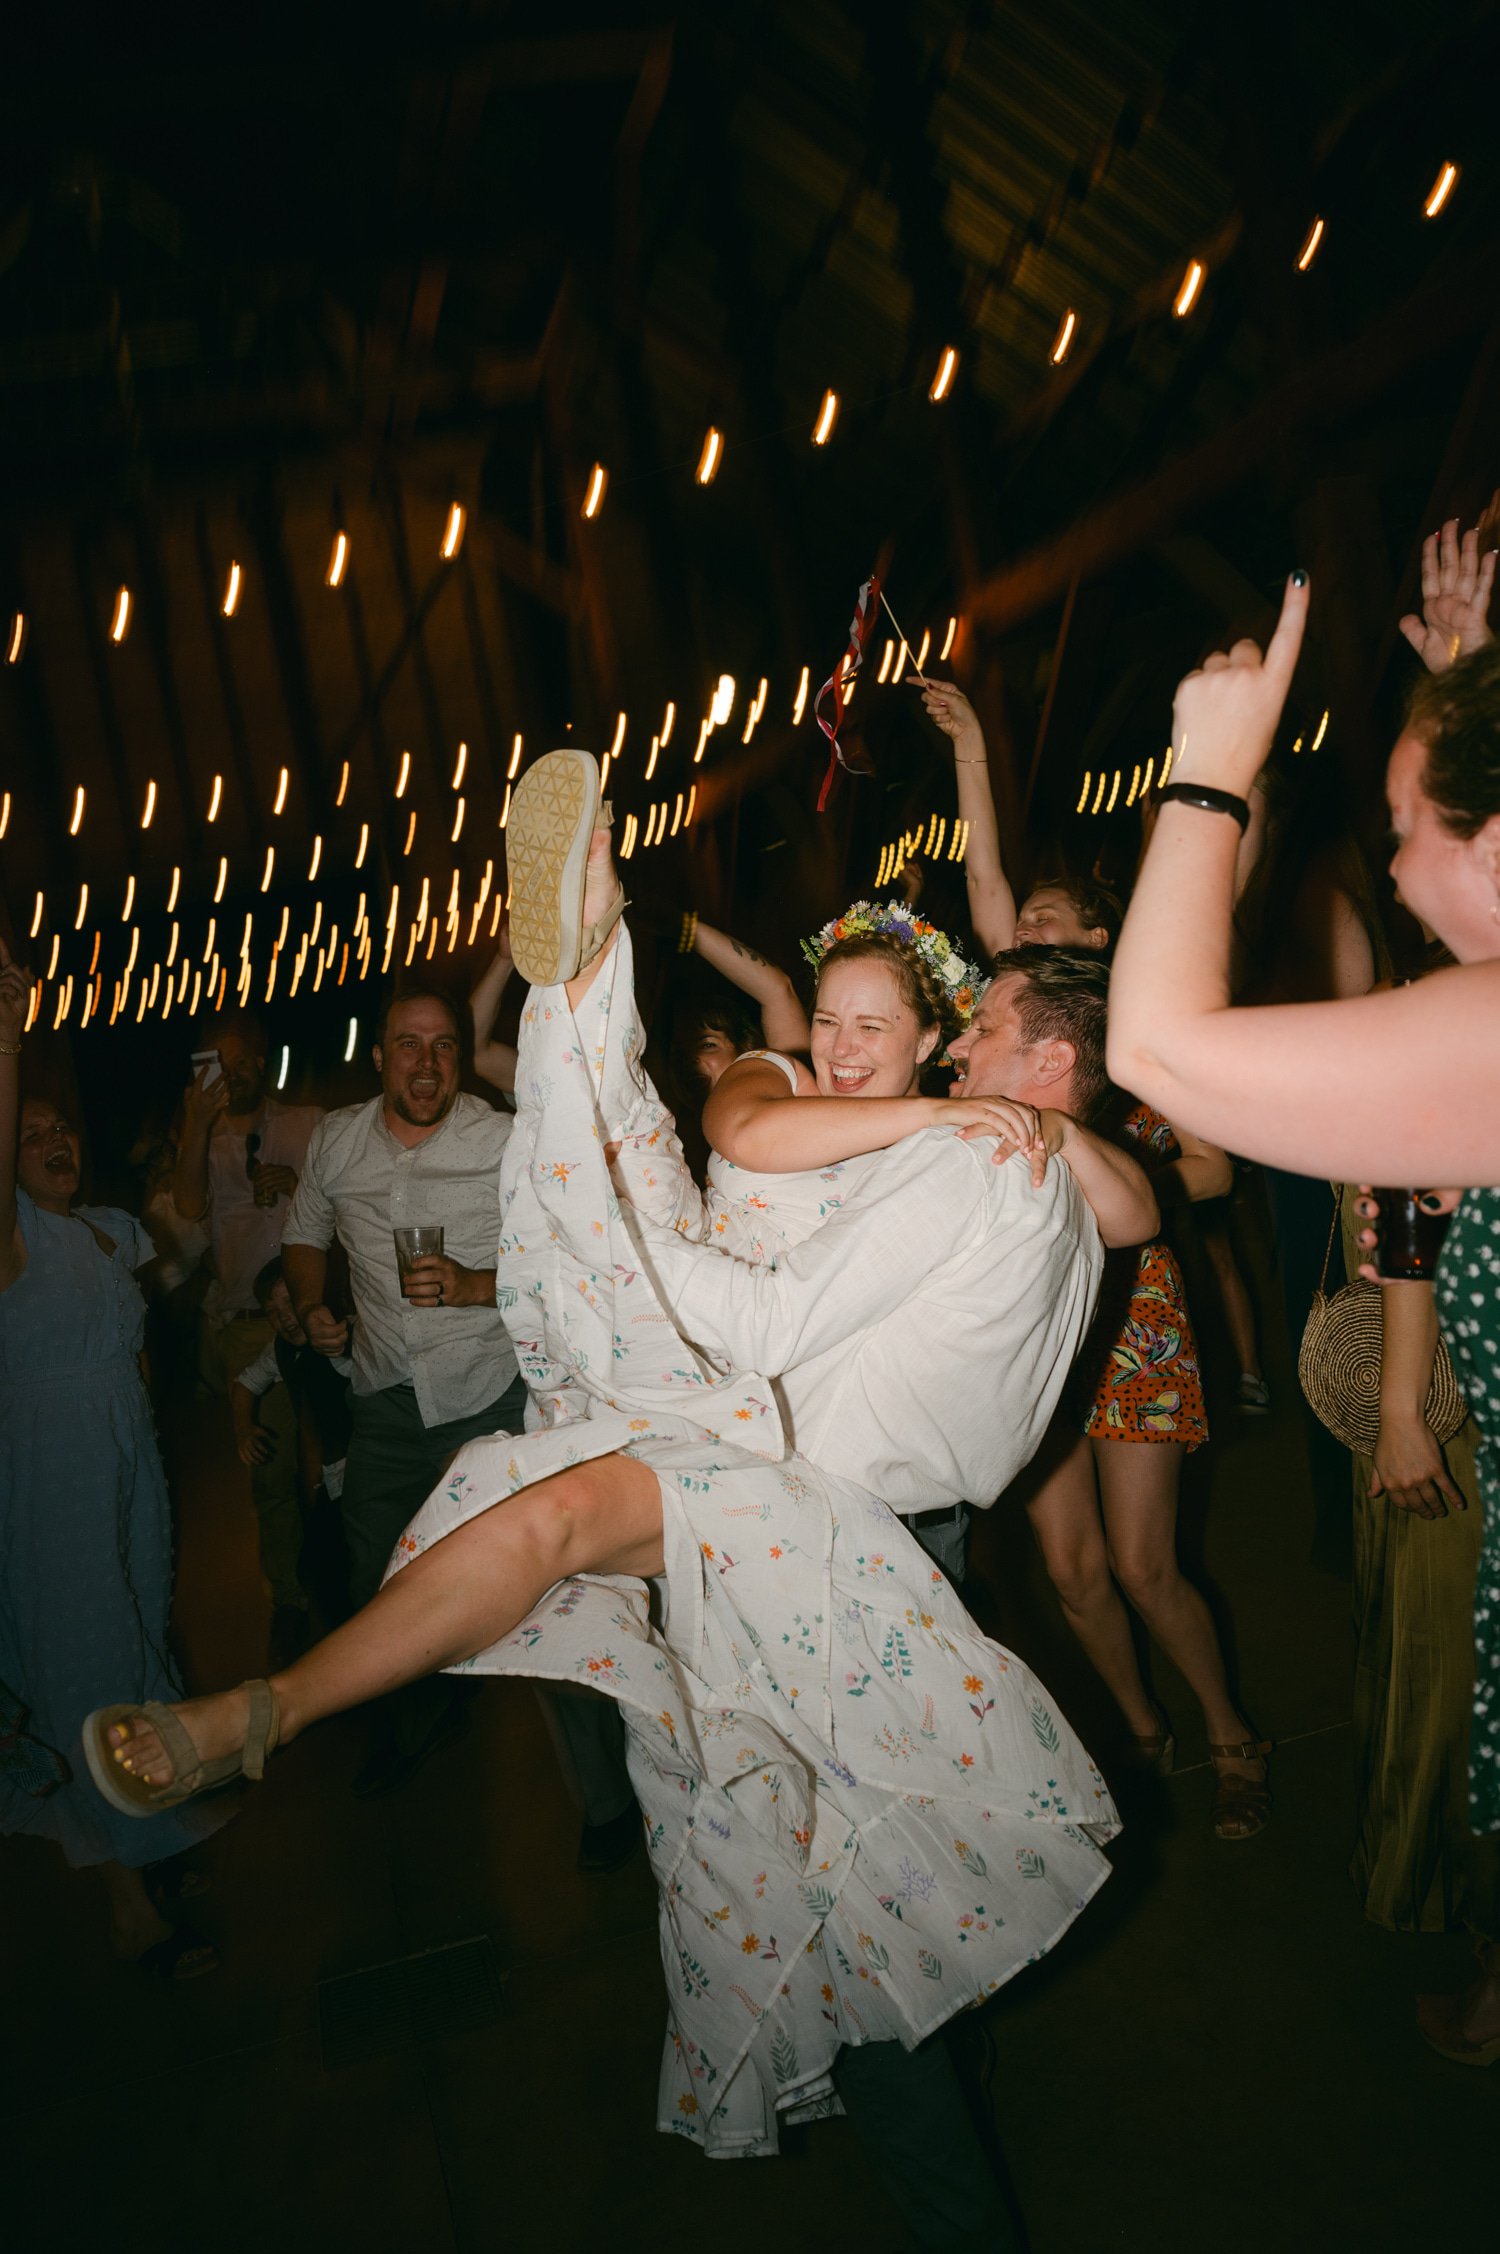 graeagle corner barn wedding, photo of the newly wed couple dancing and having fun with the guests